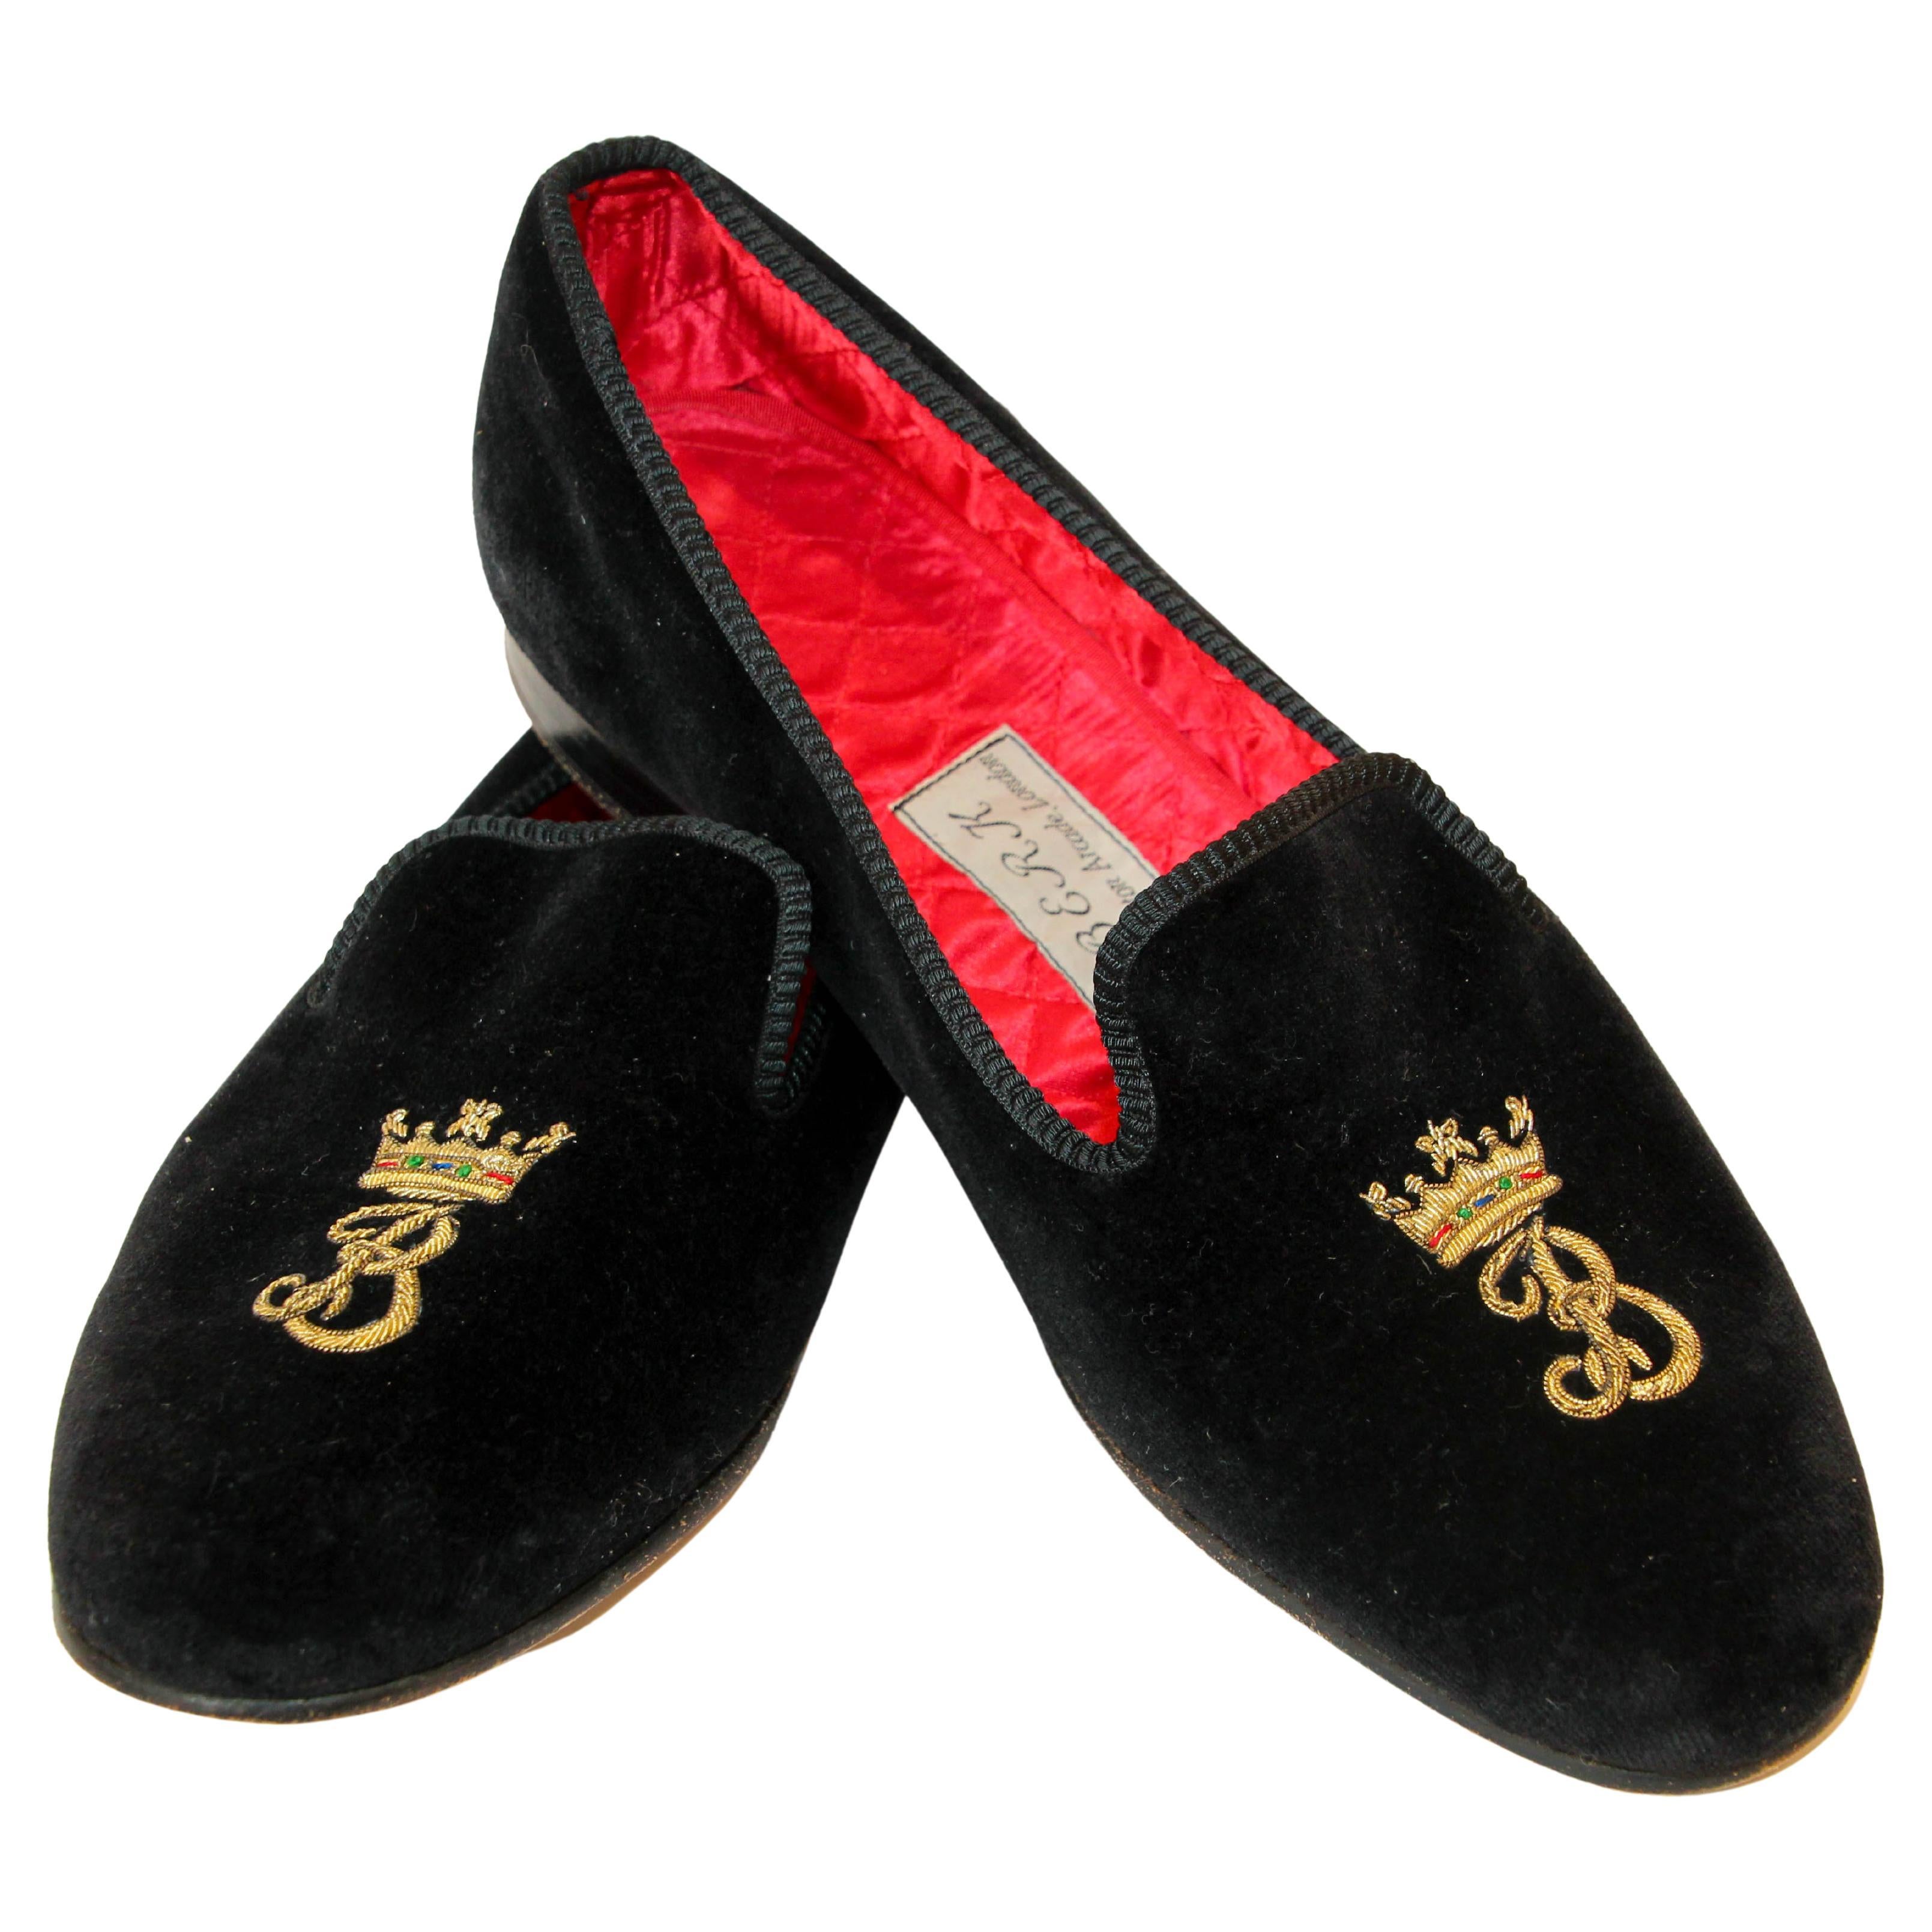 Berk of London Velvet Slippers Size 9.
by Berk of Burlington Arcade, London
Men luxury hand-made, leather-soled velvet loafers, aristocratically hand embroidered with gold bullion thread.
The loafers comes in a black velvet with a red satin quilted